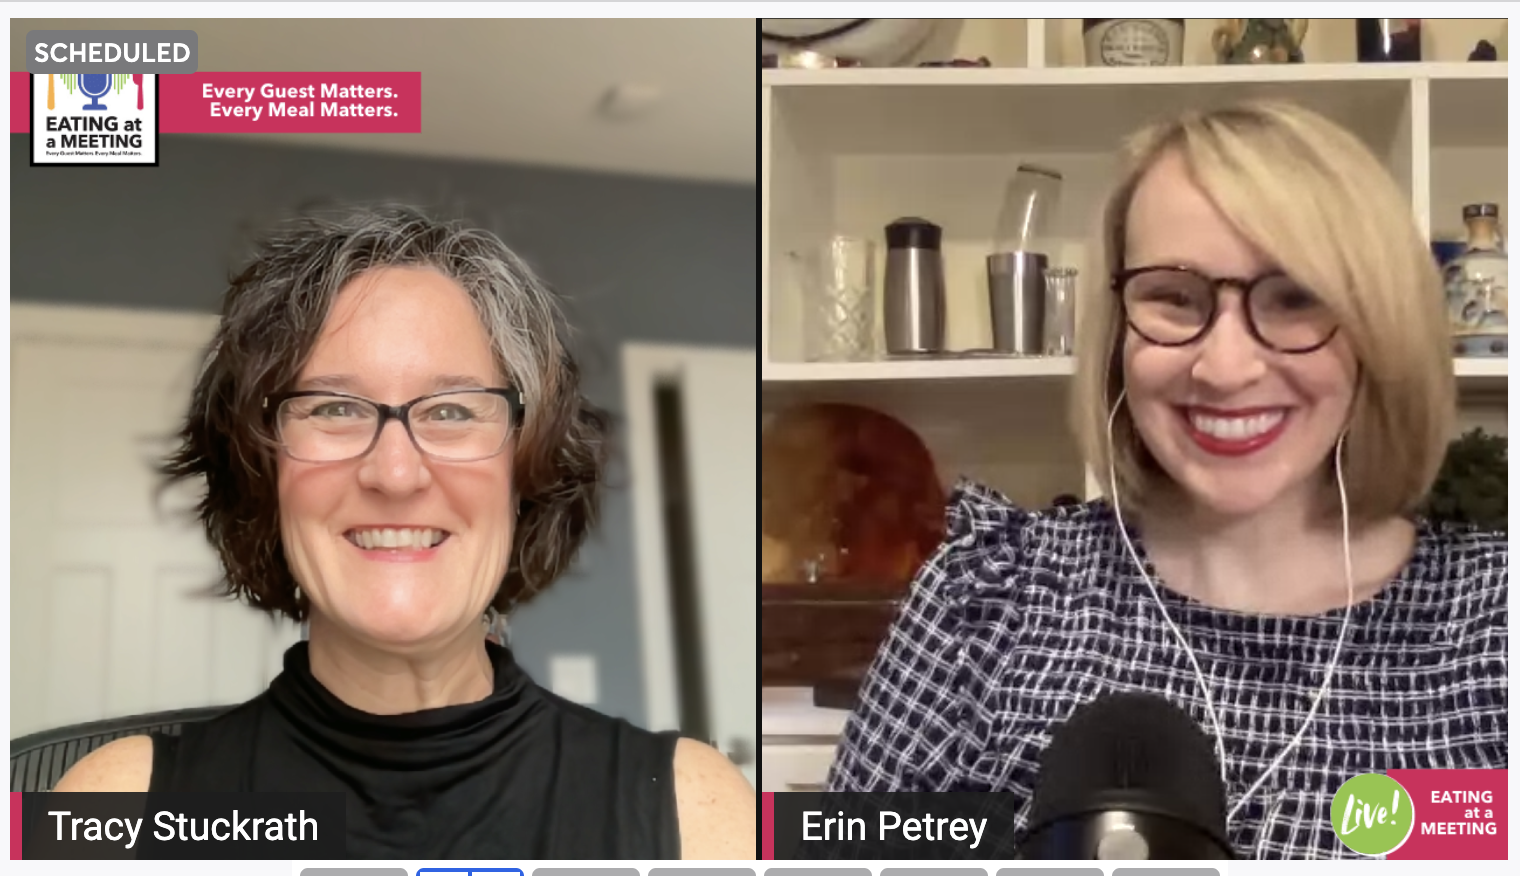 Two smiling women who are posing for a picture during the Eating at a Meeting LIVE podcast. Their photos are side by side. Erin Petrey is The Cocktail Coach who is talking about beverages.. Tracy Stuckrath, on the left hosts the podcast